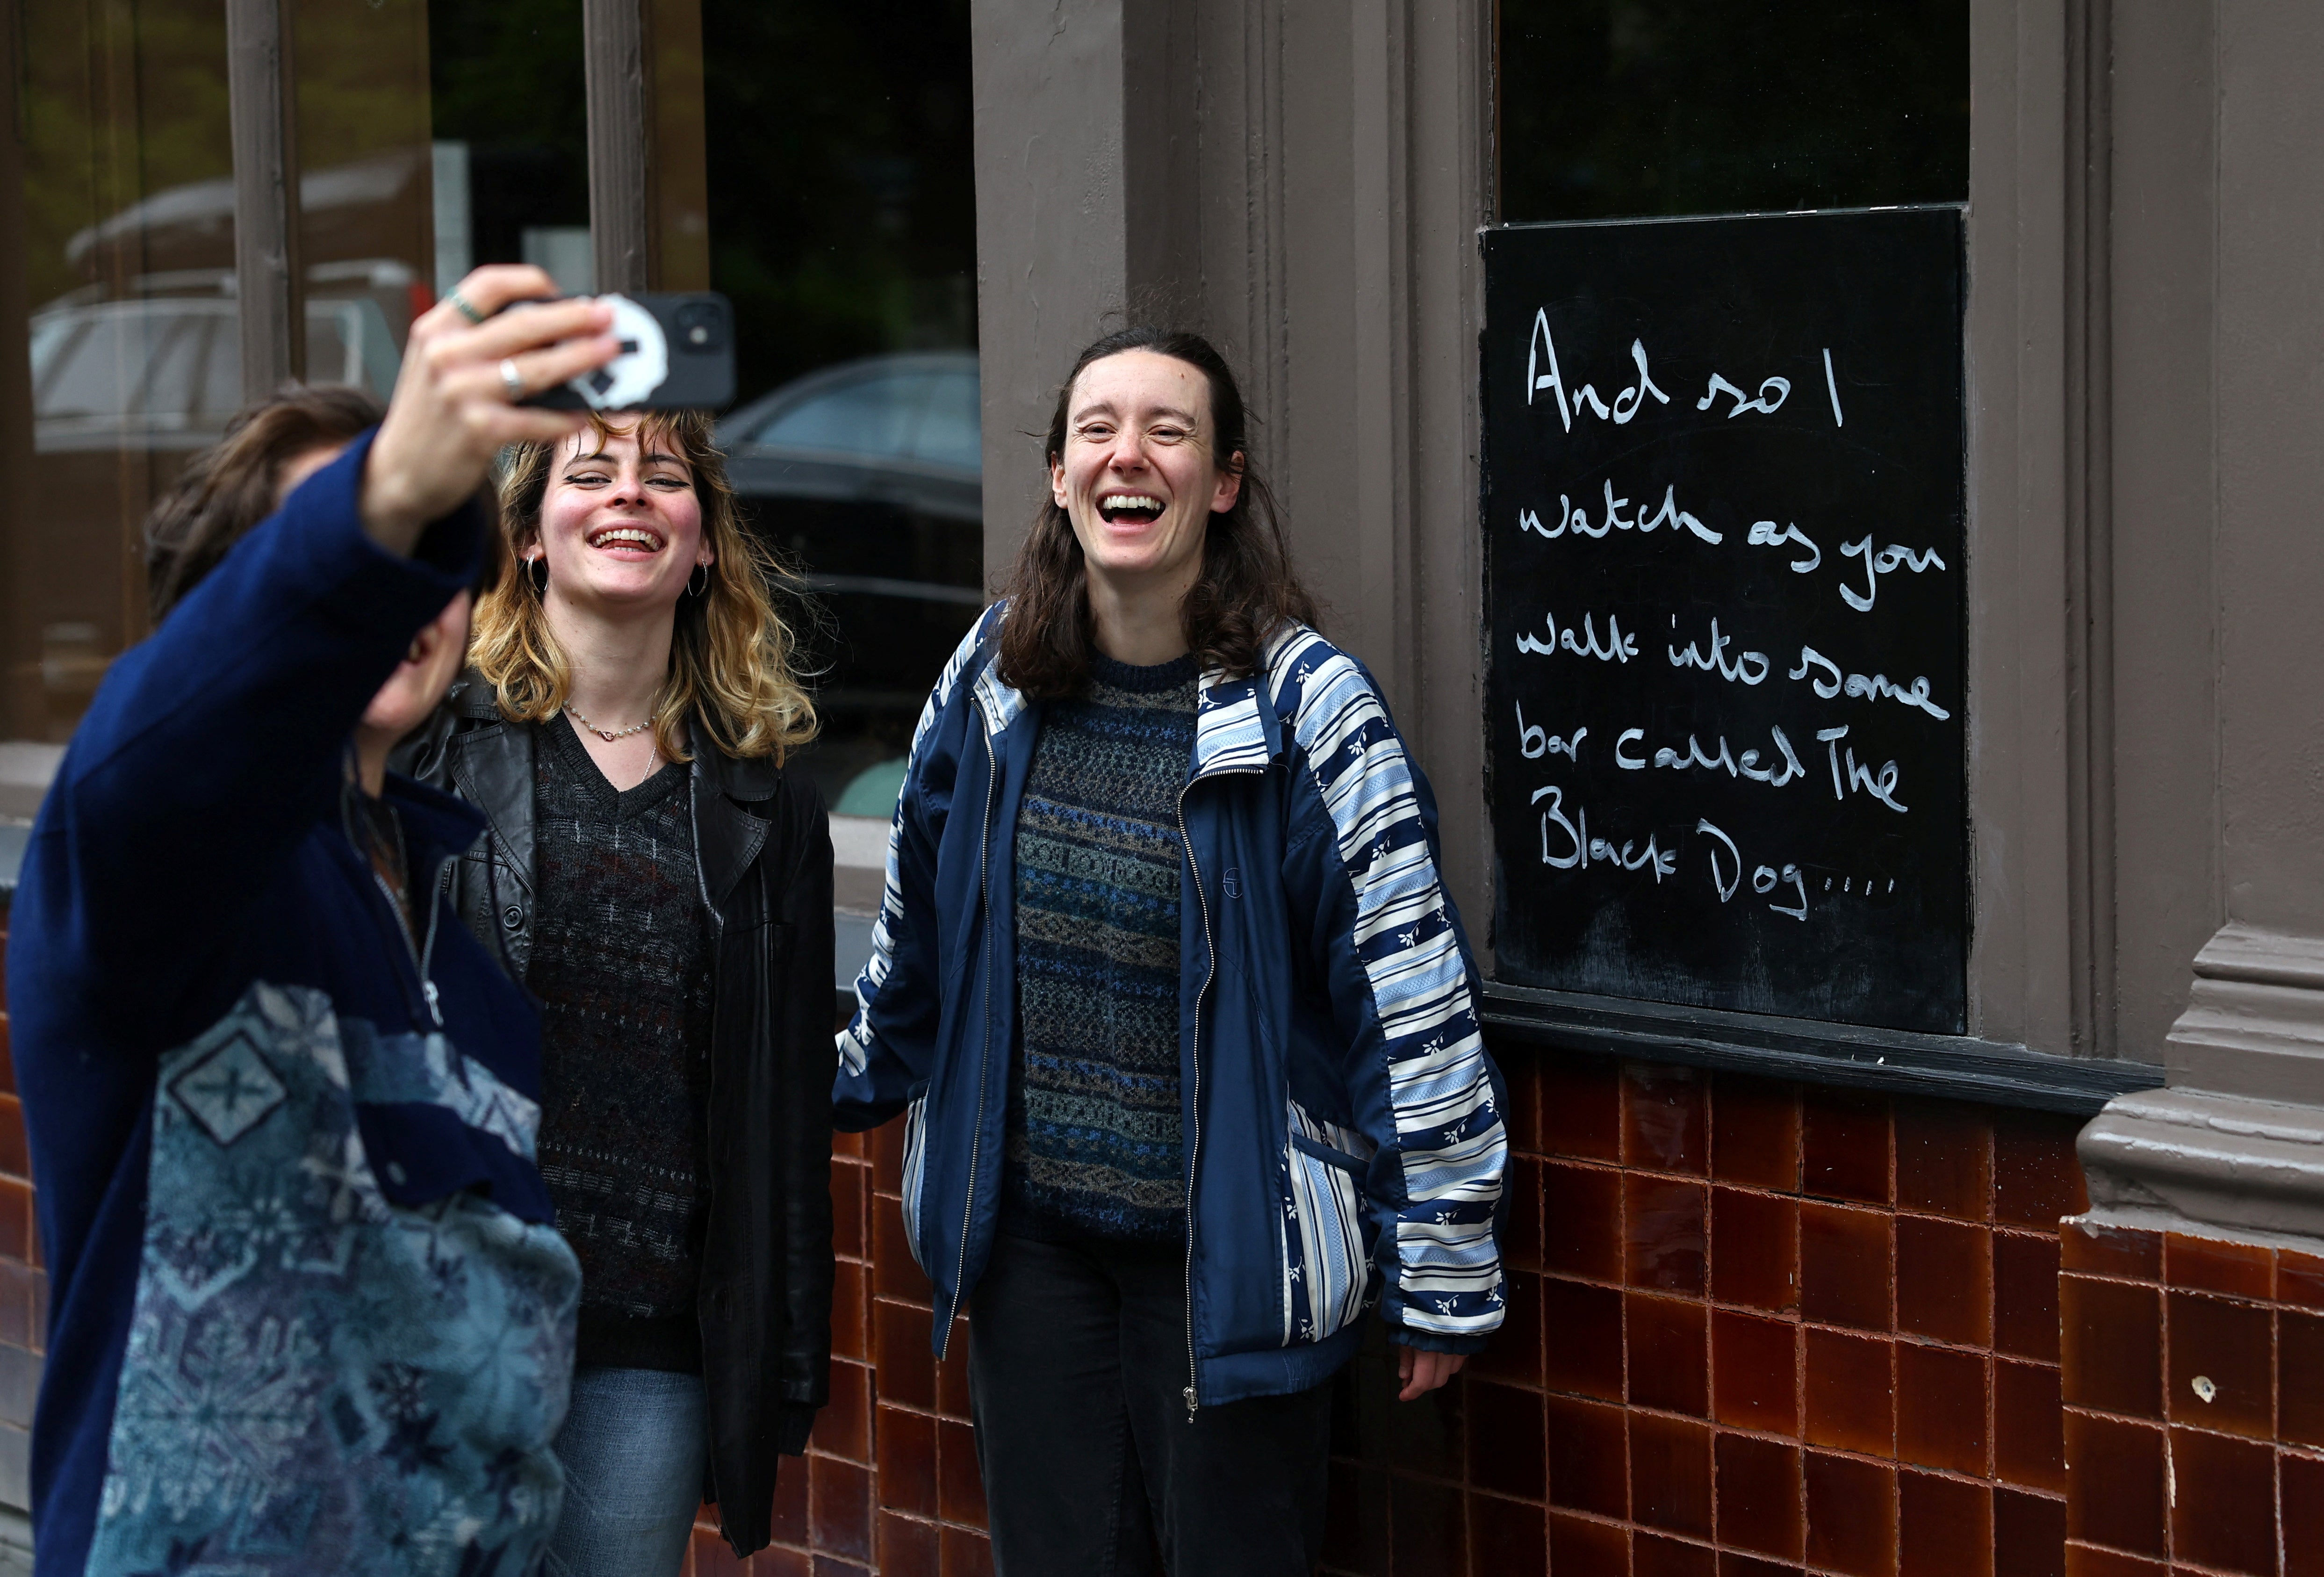 Fans of Taylor Swift take images next to lyrics from the song The Black Dog by Taylor Swift, written outside The Black Dog pub, believed by its owners to have been referenced in the track,